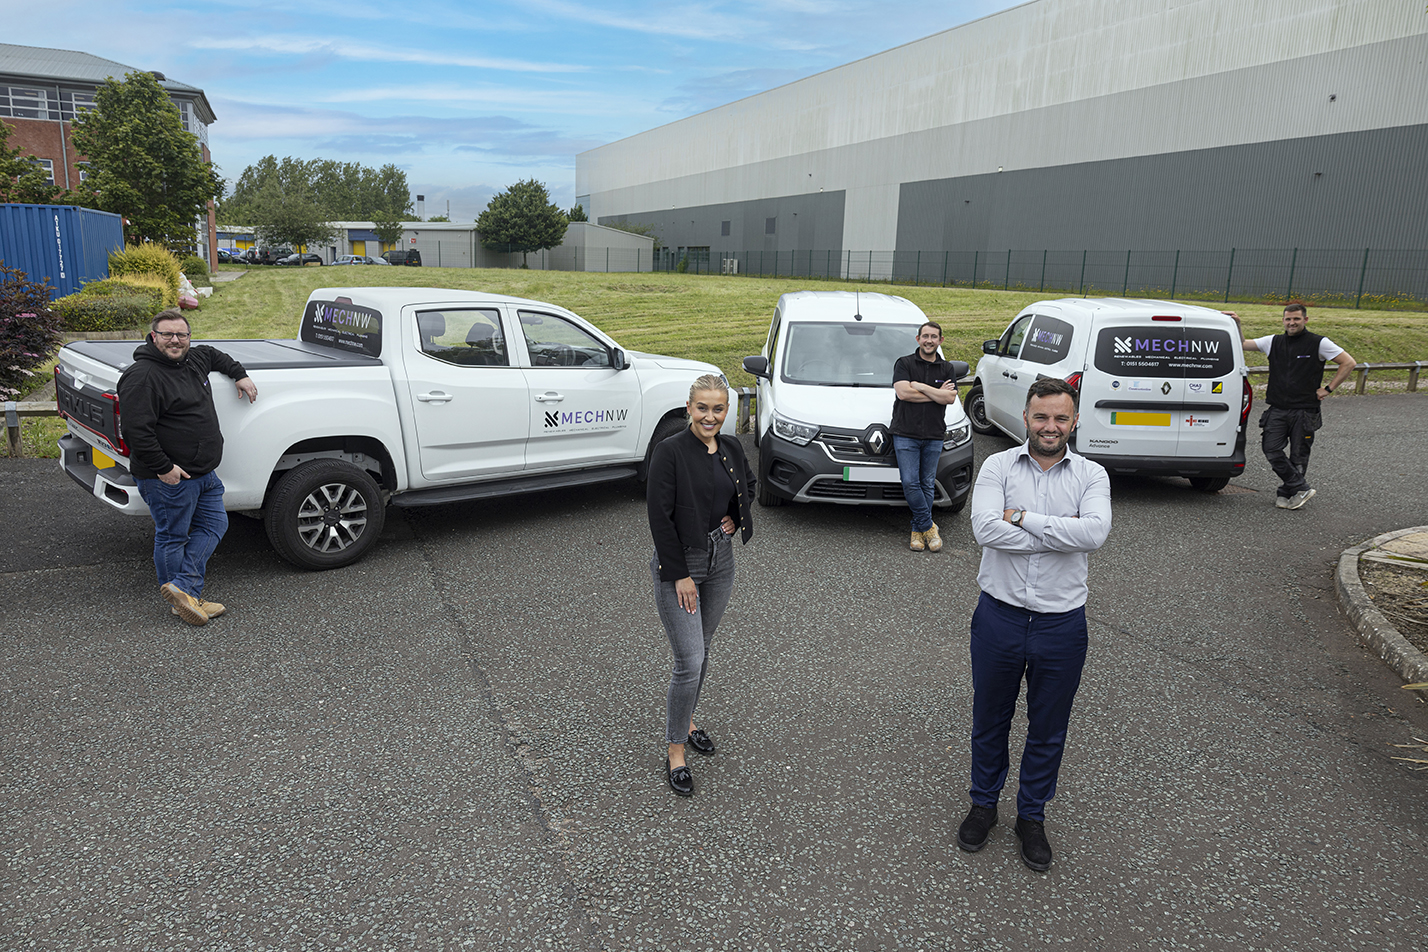 Hannah Pearson From Vanaways With Chris Hannon From Mech Nw And Some Of The Company’s New Electric Vehicles - Van Sales UK